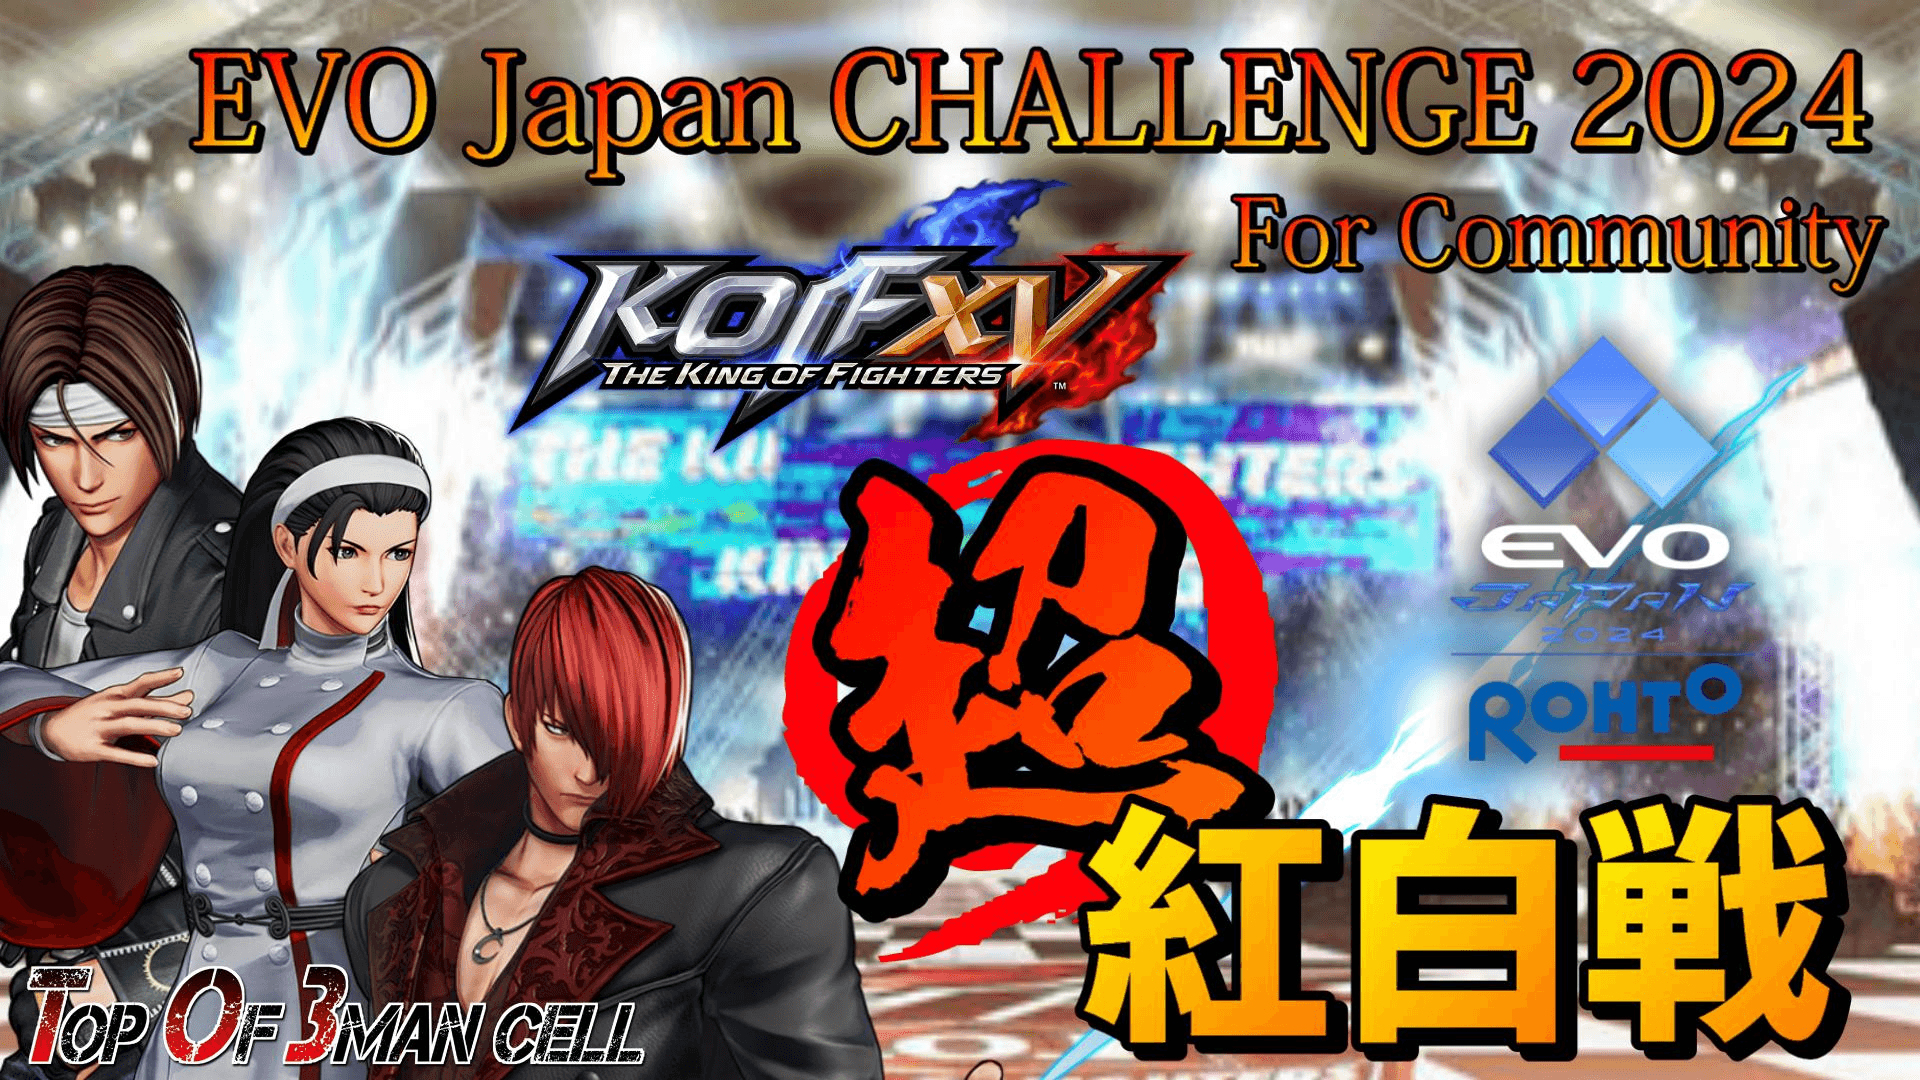 KOF15超紅白戦～EVO Japan CHALLENGE 2024 For Community～ feature image